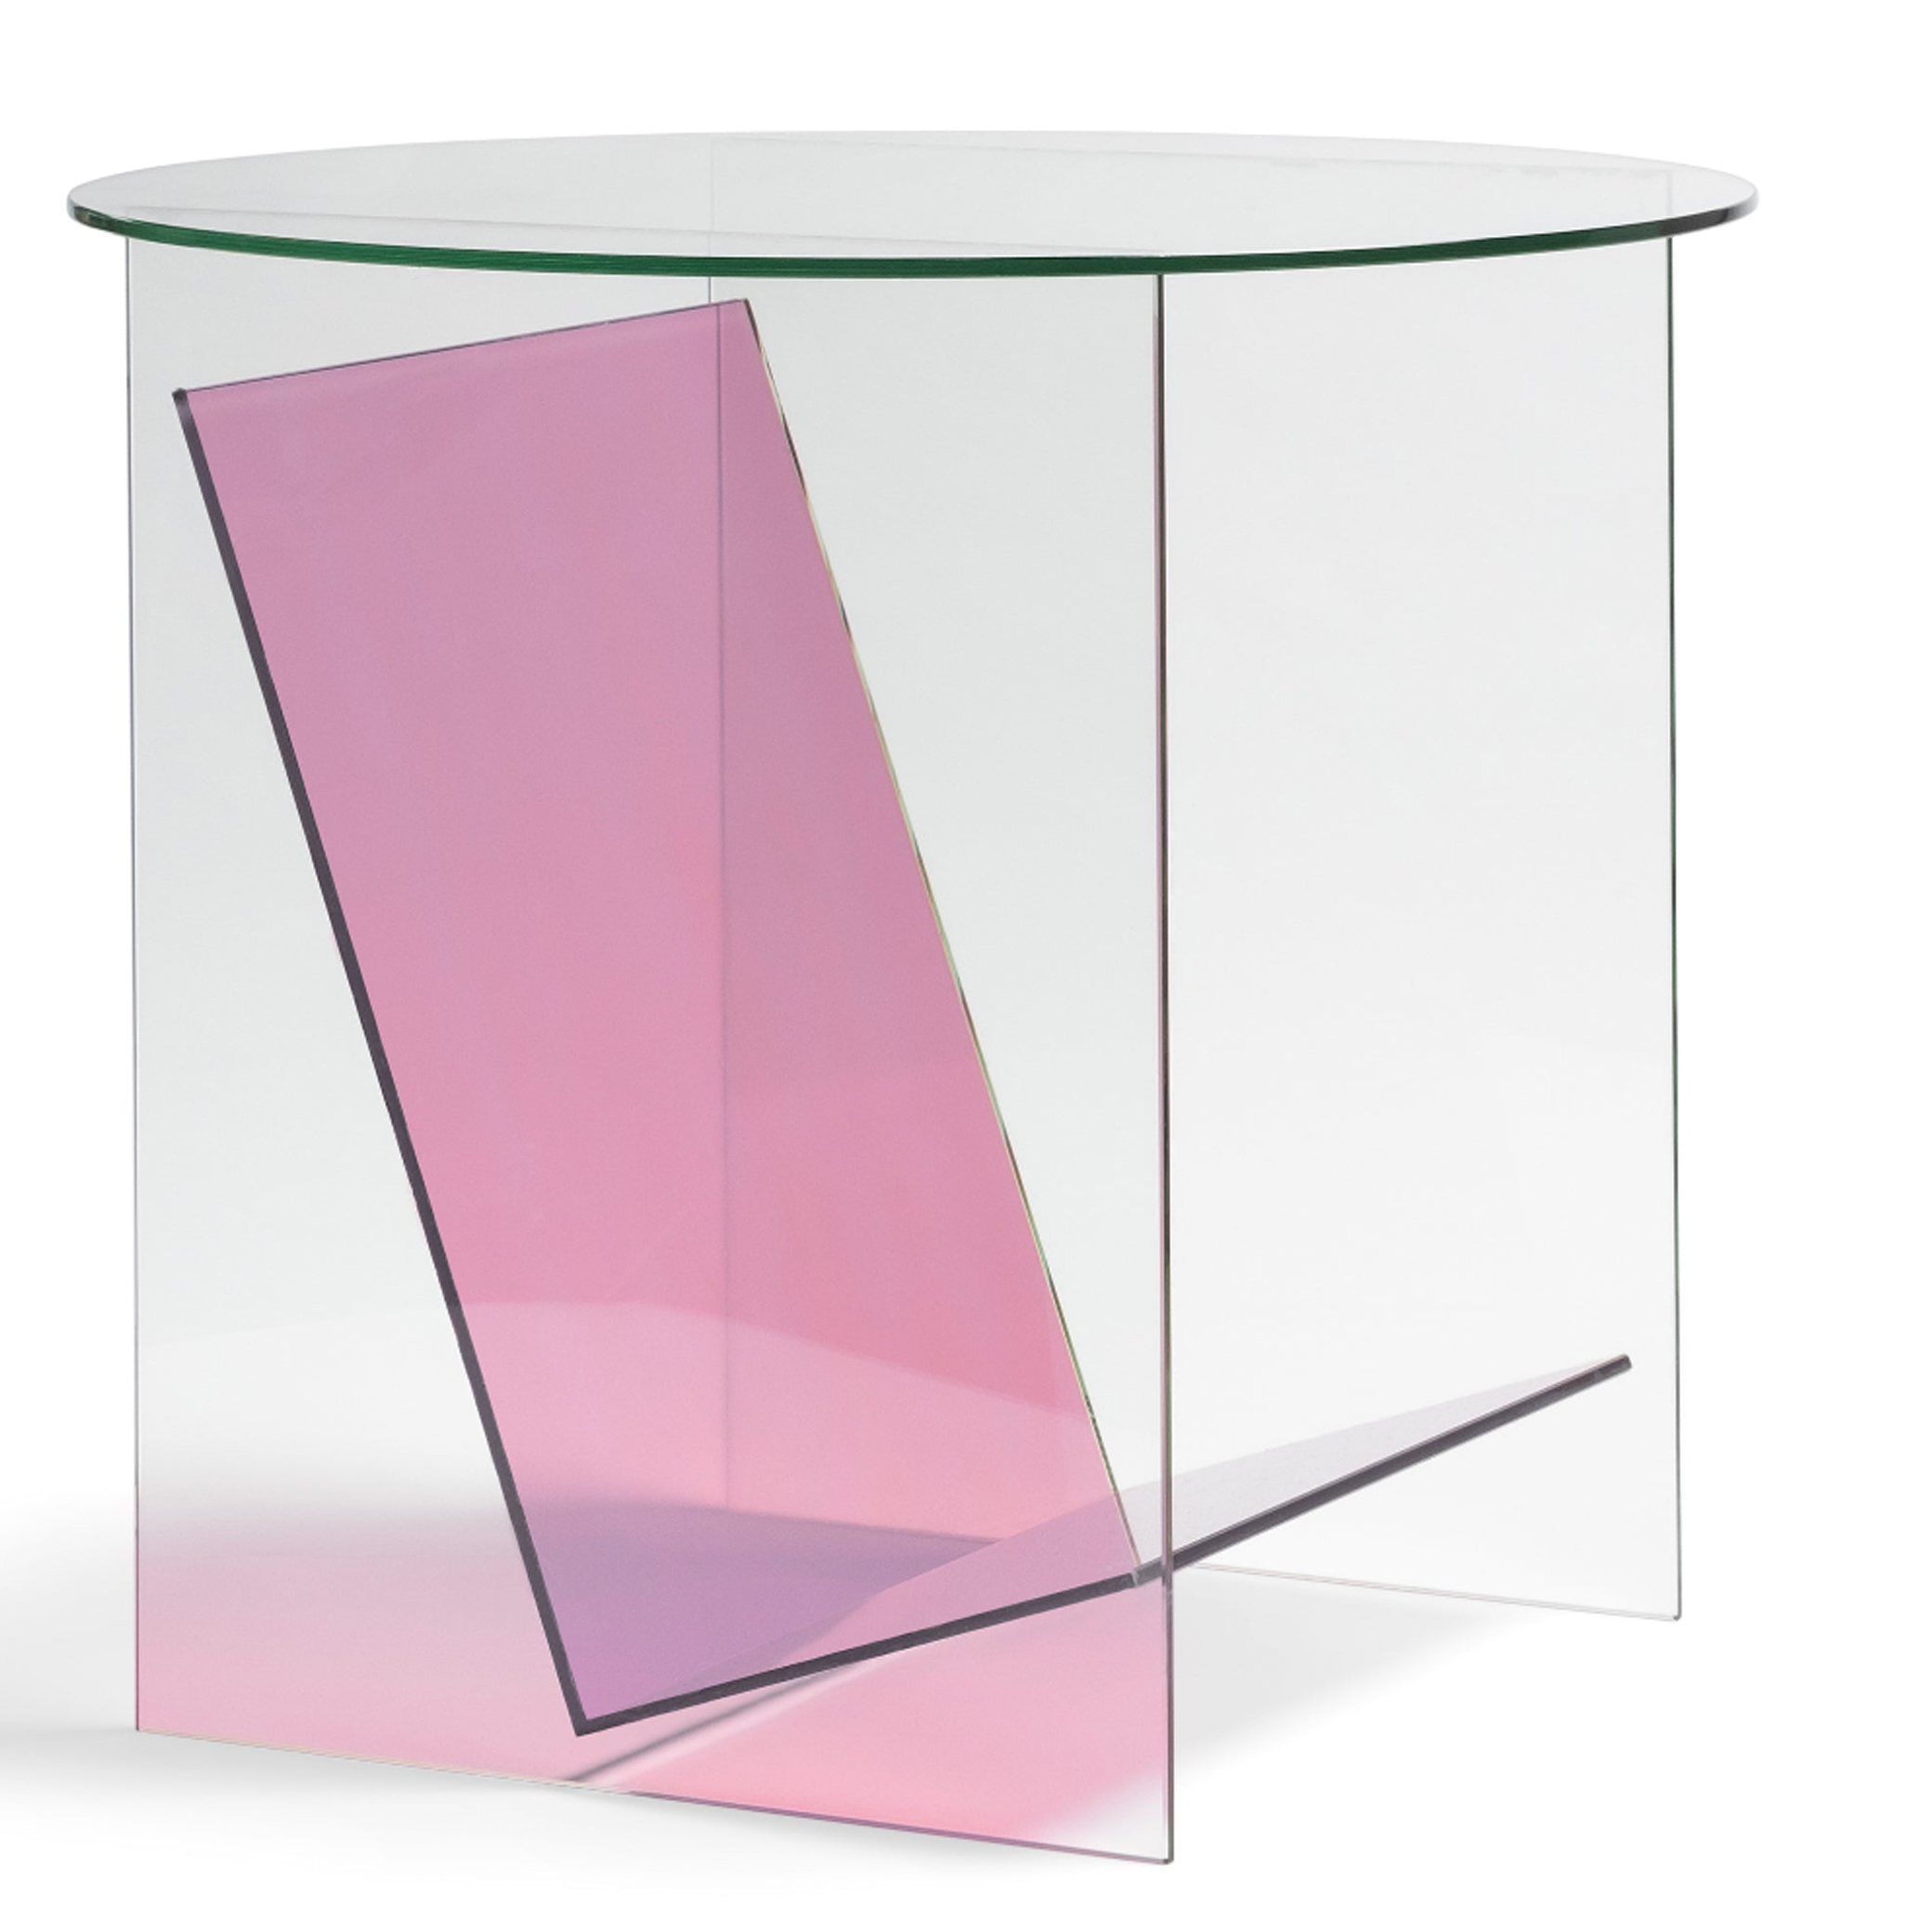 andklevering-pink-side-table-1